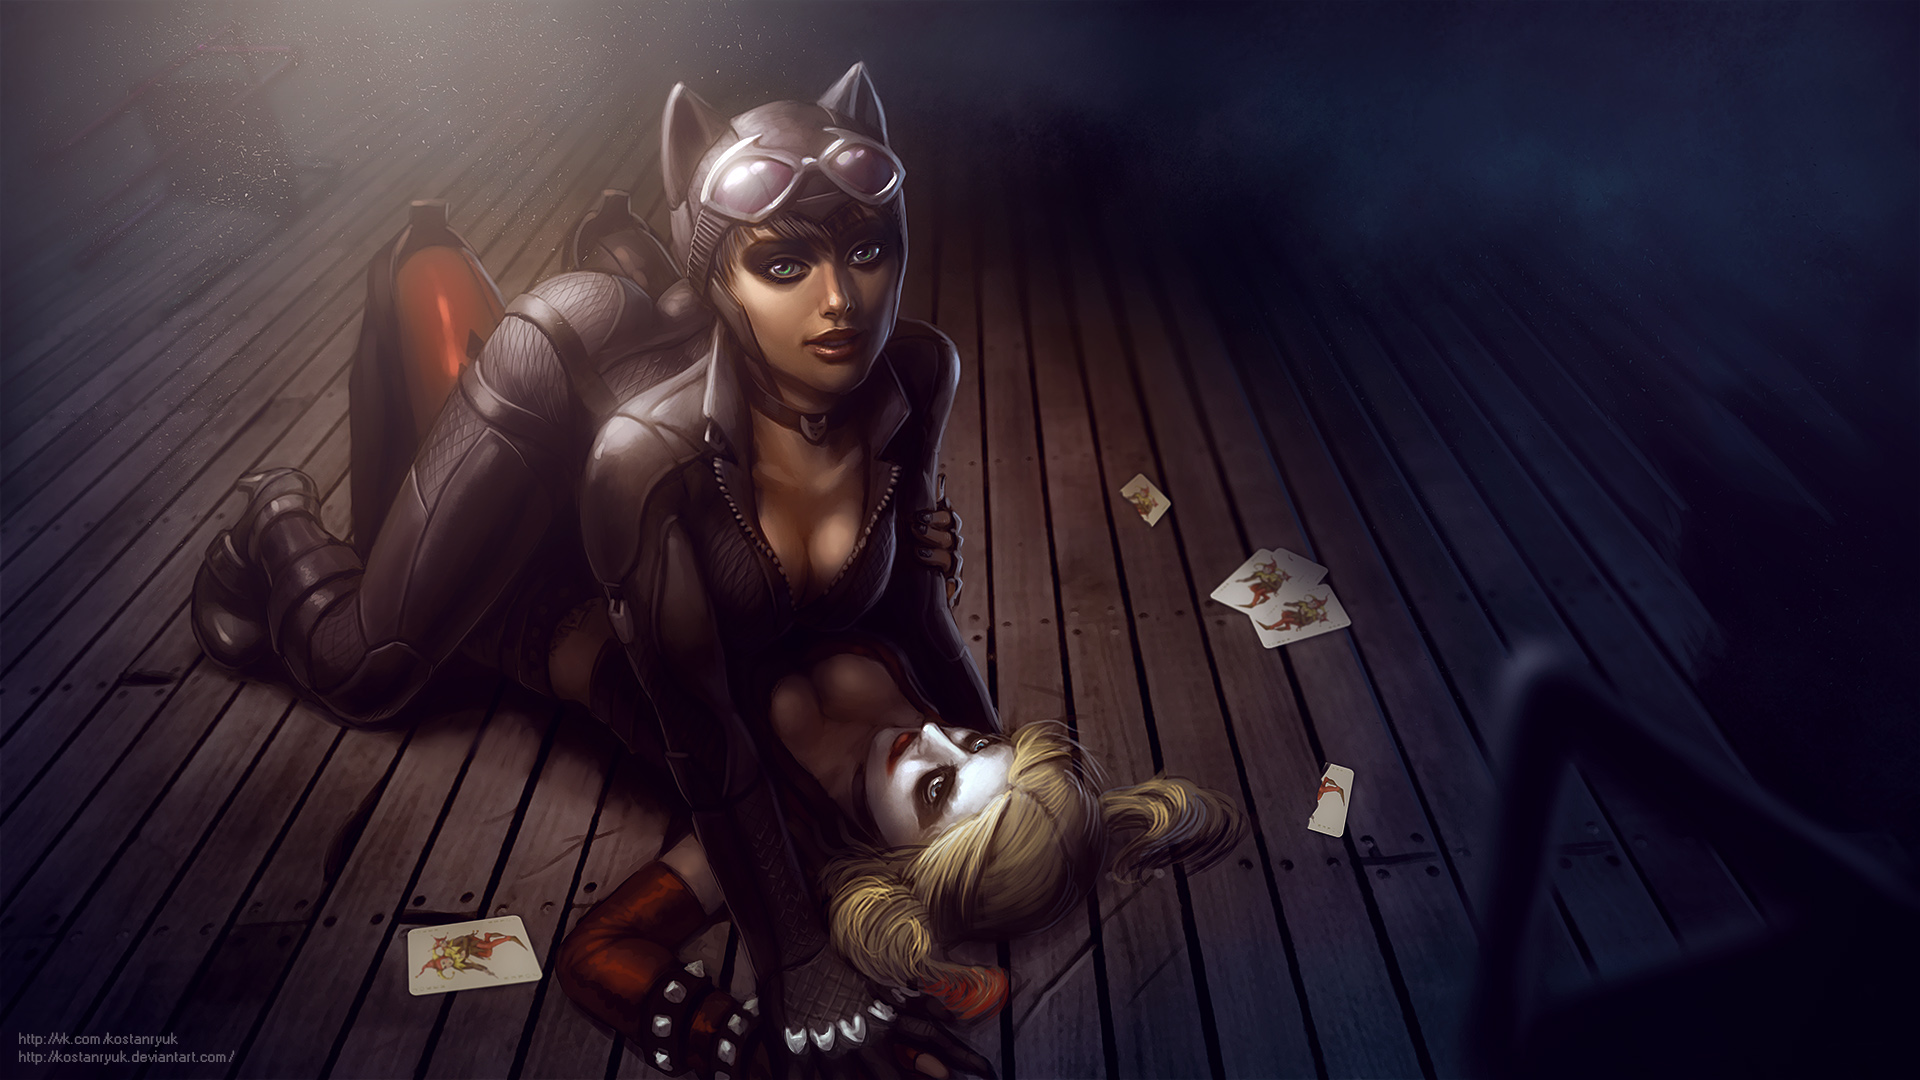 catwoman, injustice: gods among us, harley quinn, video game, injustice